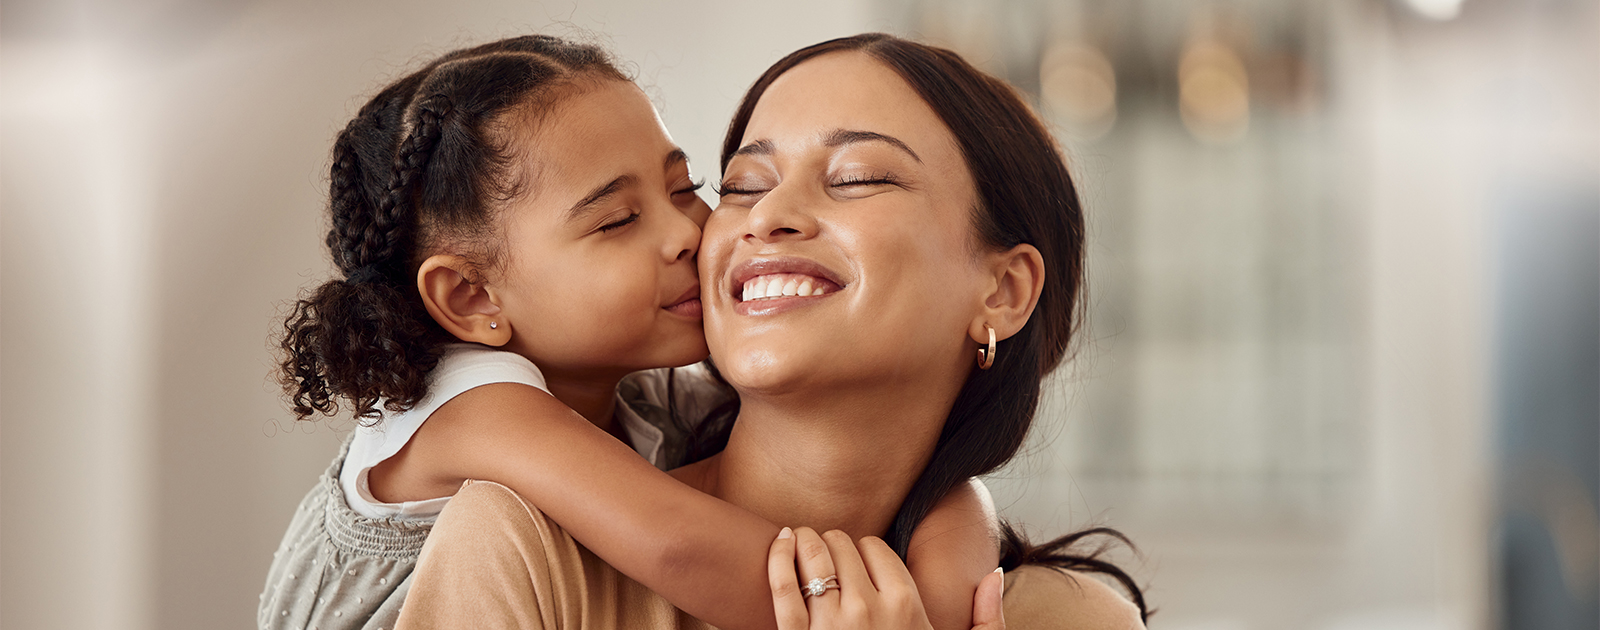 Toddler and young adult woman hug and smile with their eyes closed.